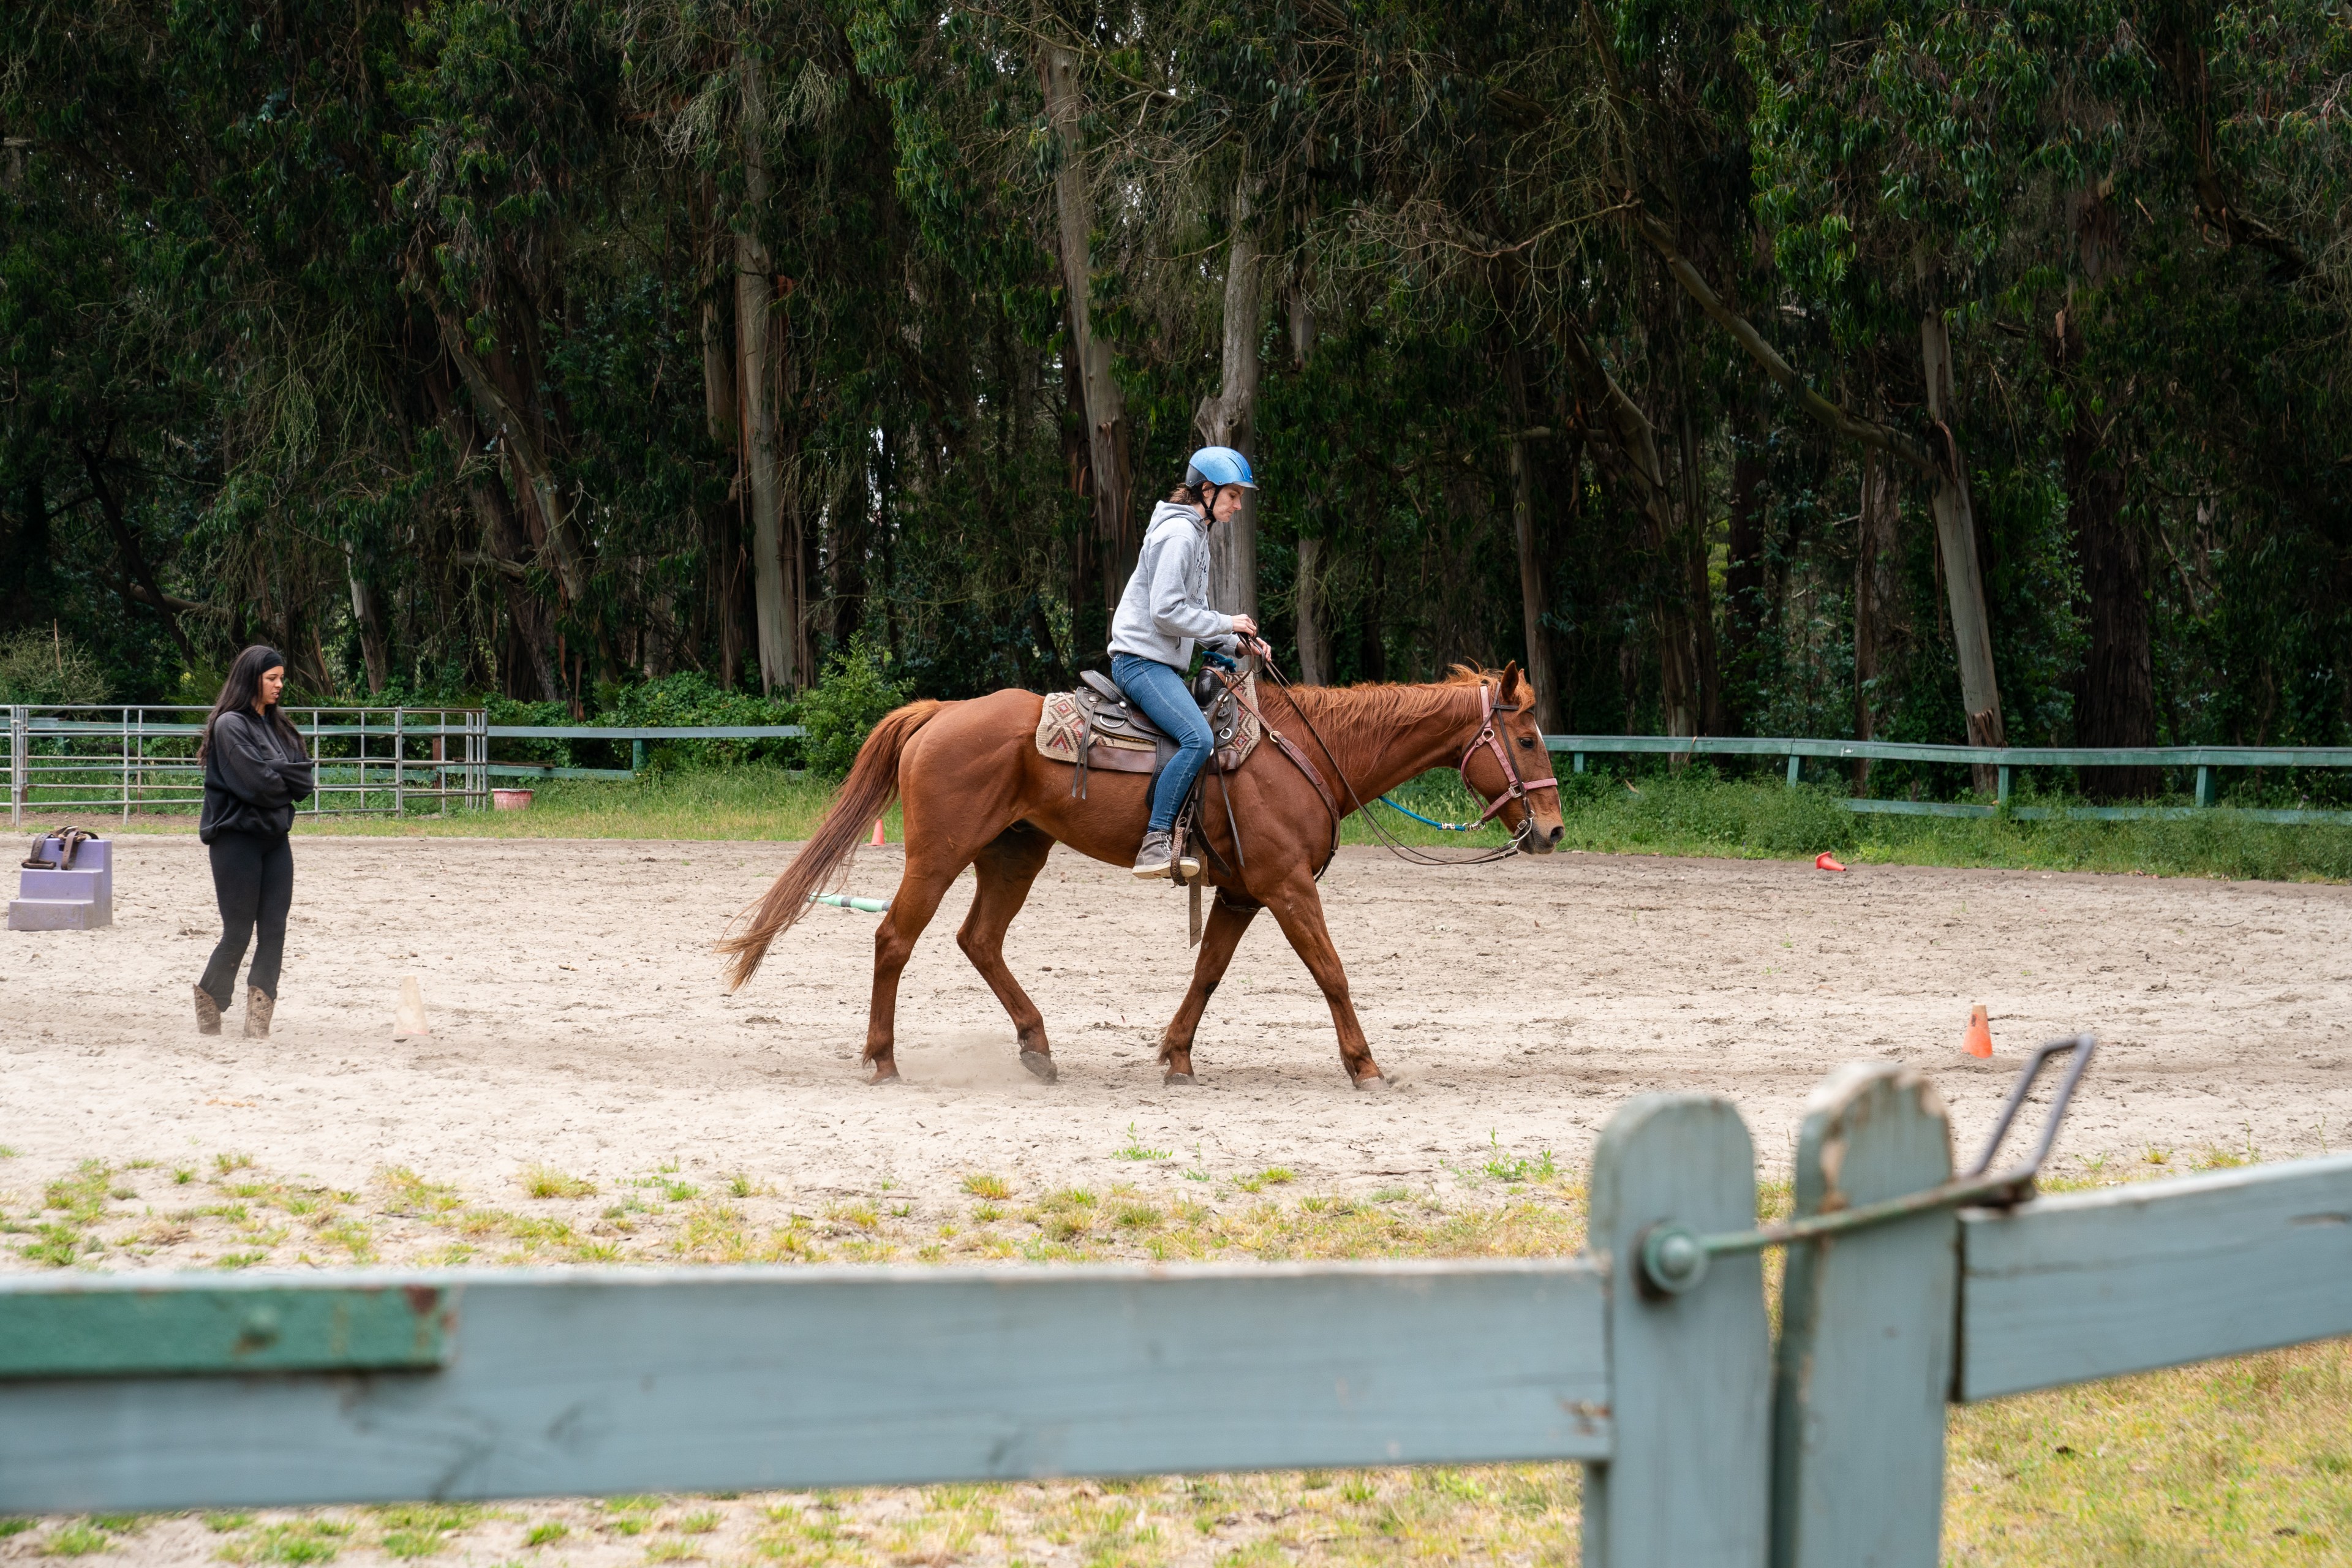 A person in a blue helmet rides a brown horse in a sandy arena, with another person observing, surrounded by lush green trees.